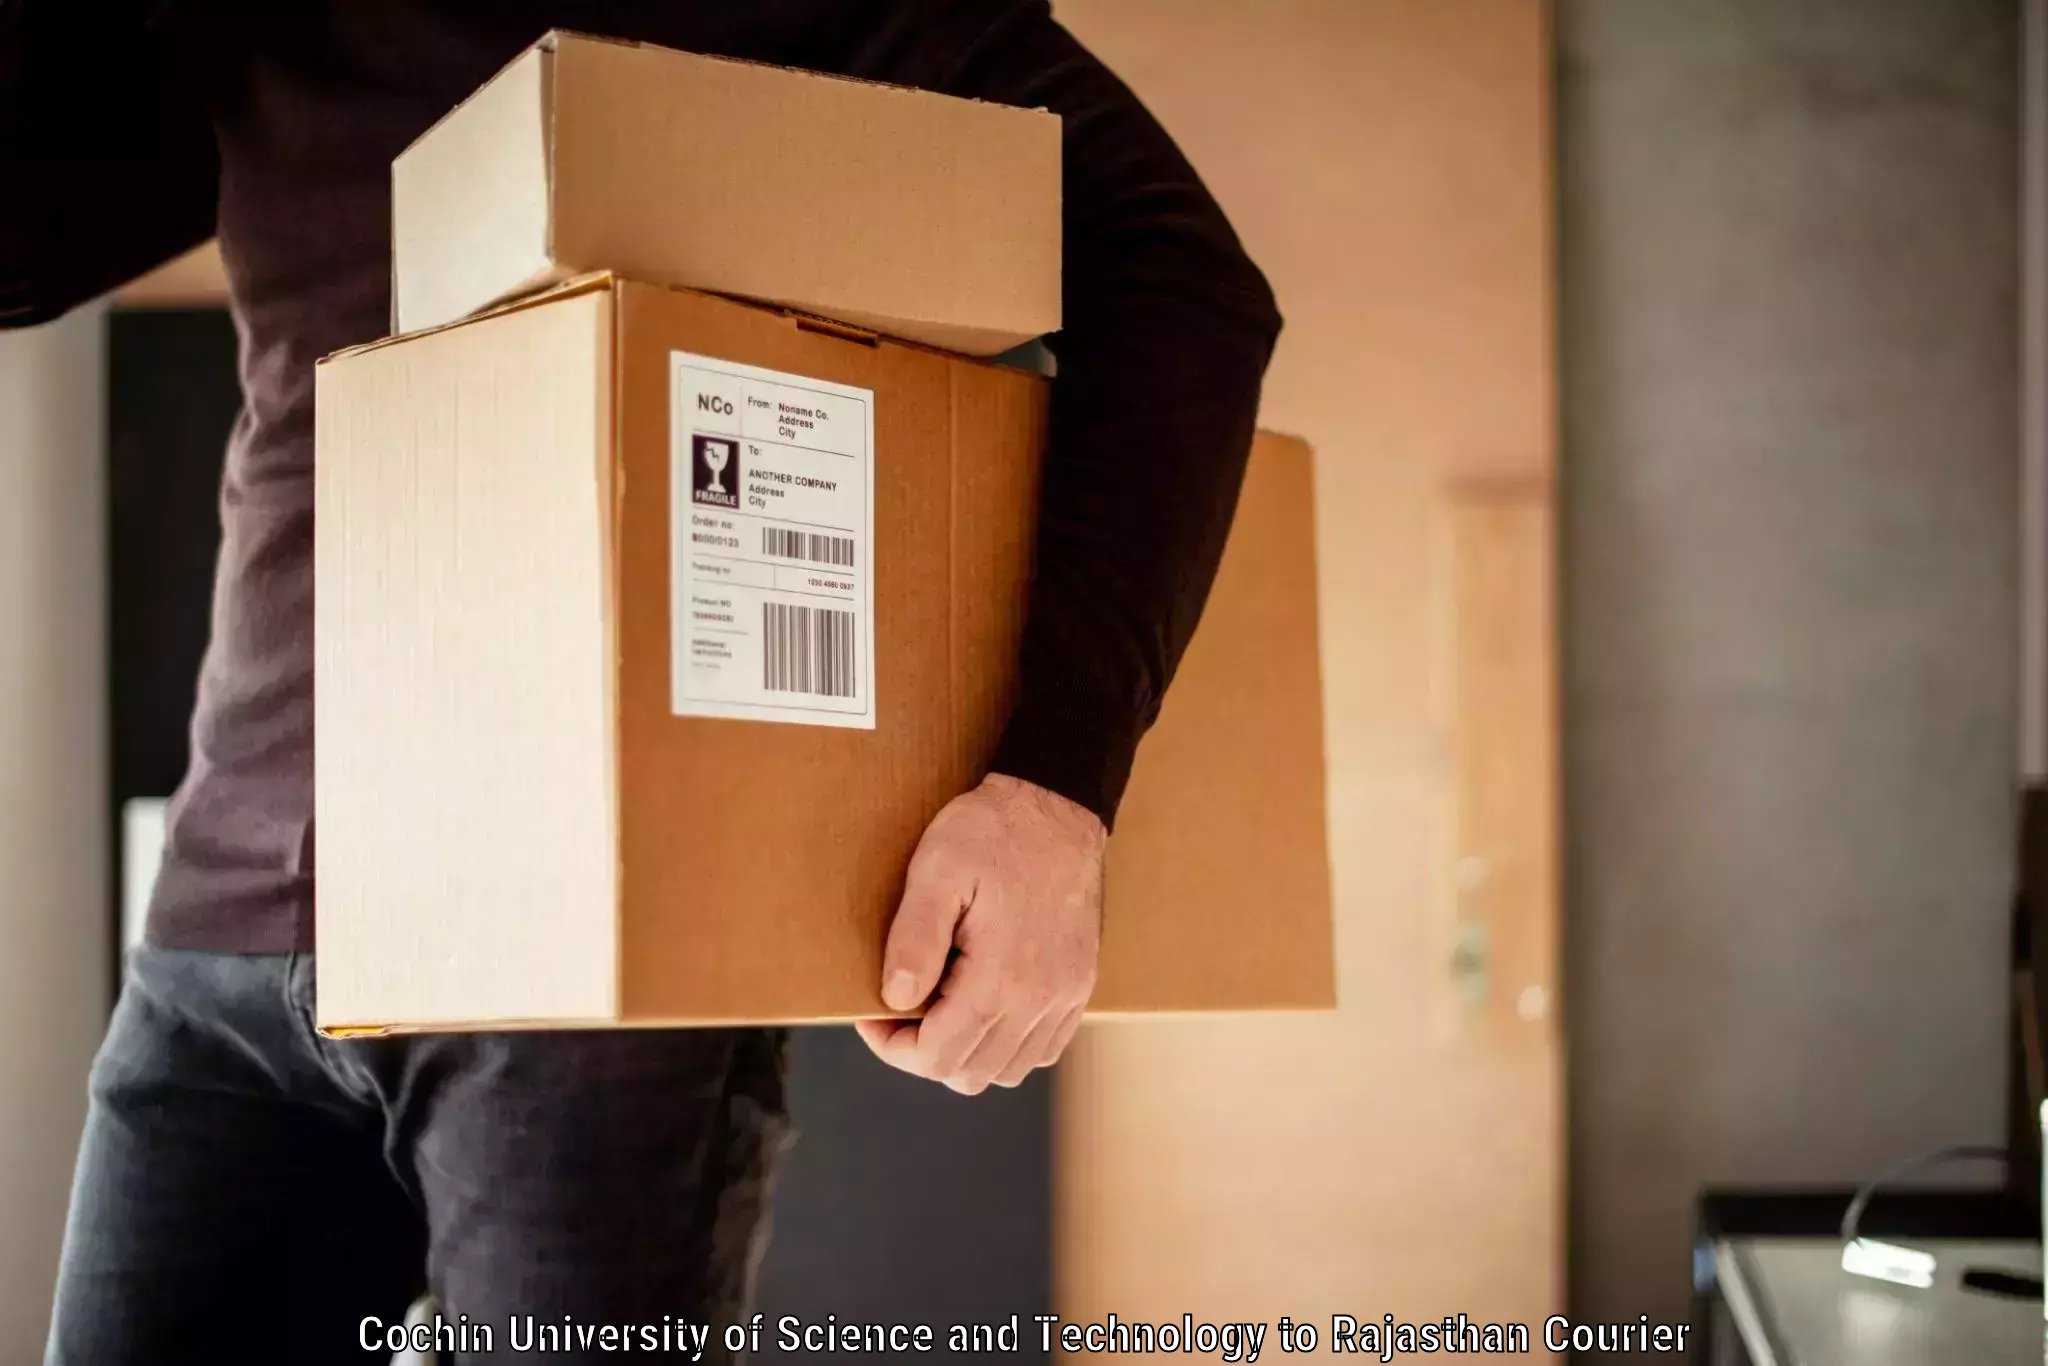 Scheduled baggage courier Cochin University of Science and Technology to Ajmer